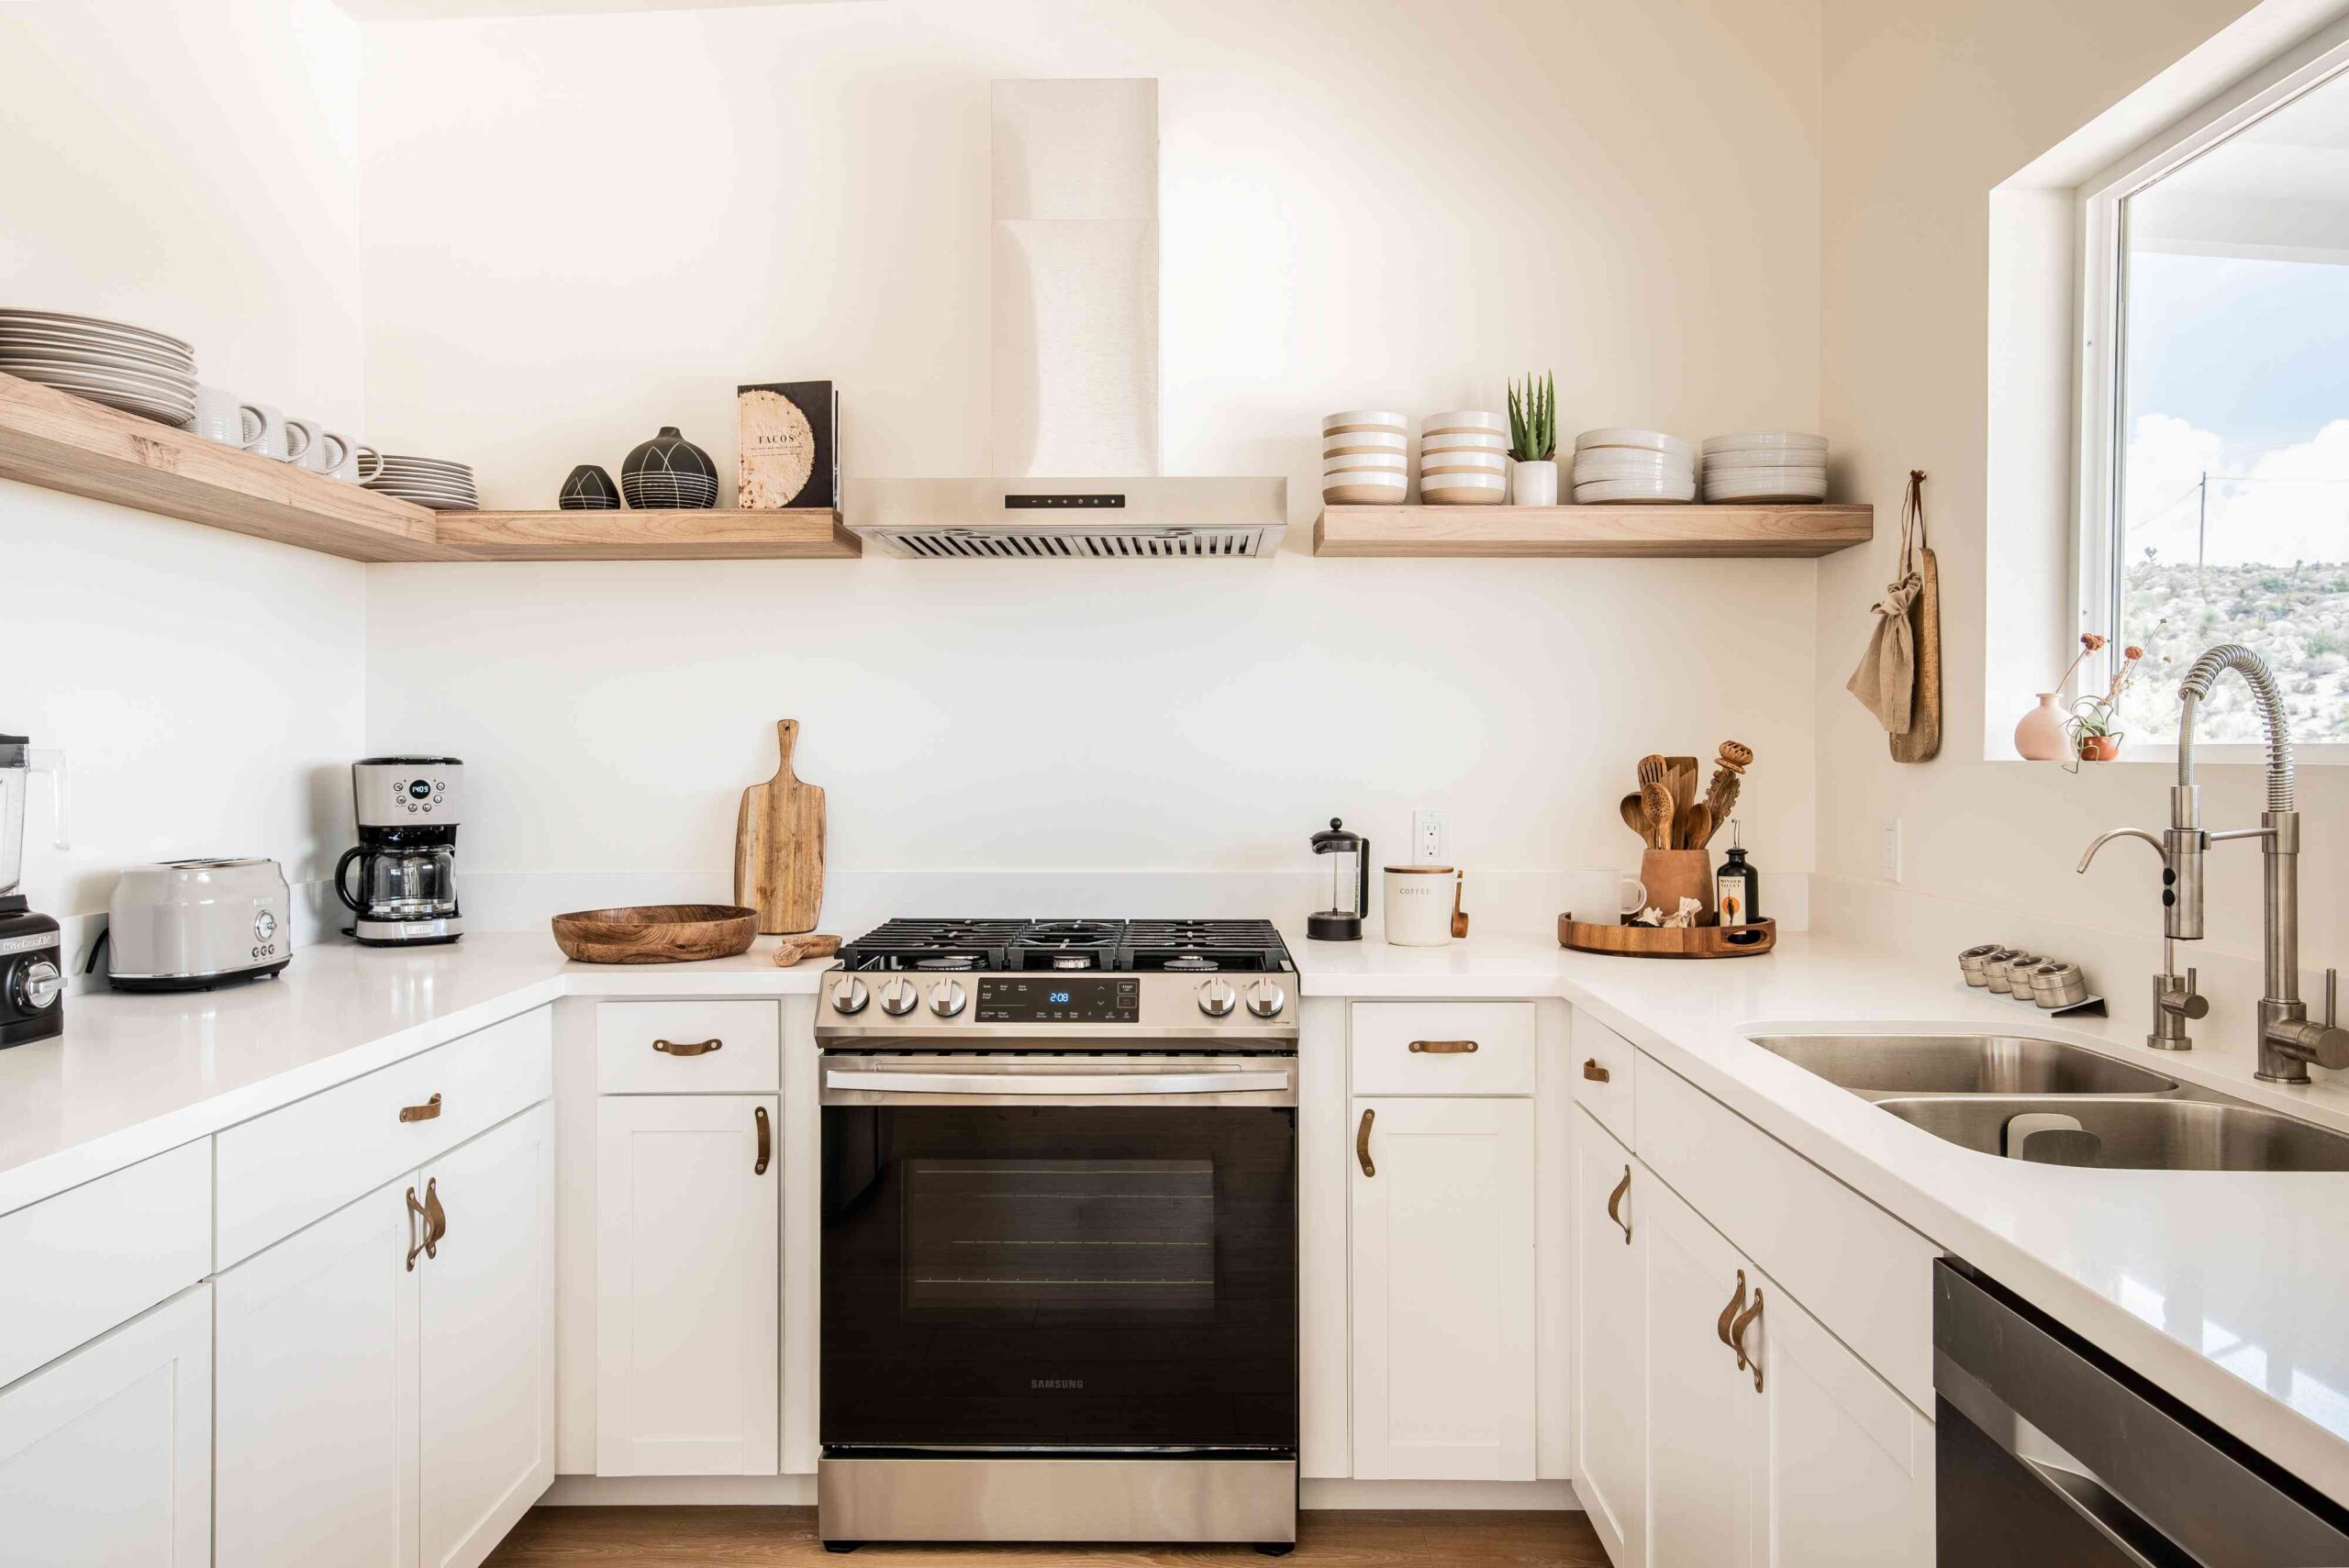 Kitchen Space Saving Ideas: Maximize Your Small Space